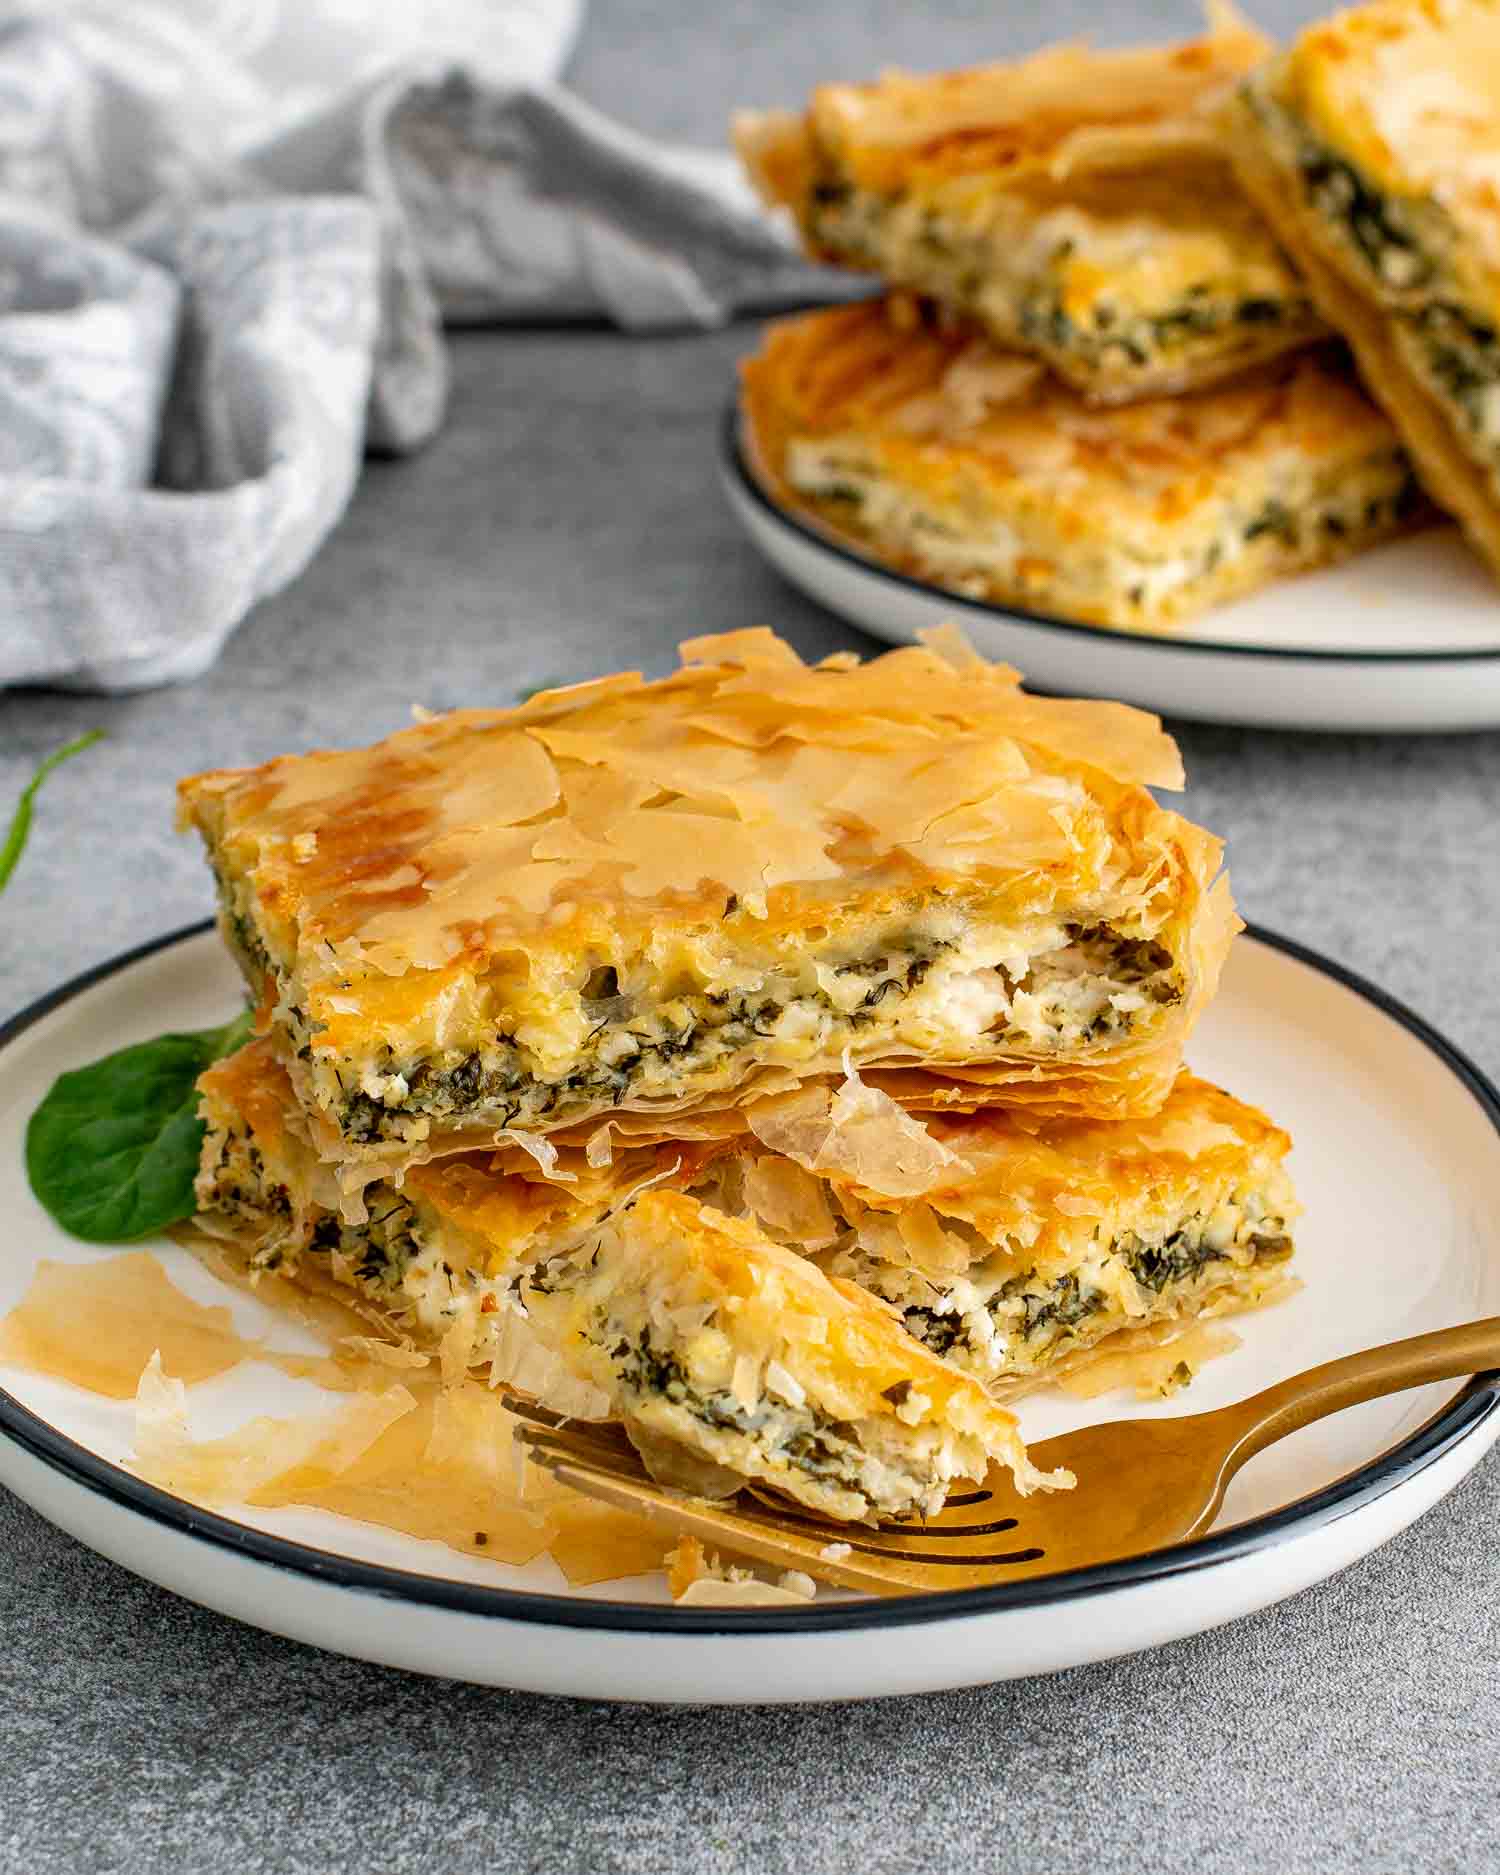 Stacked spanakopita slices on a plate with a fork, ready to eat.